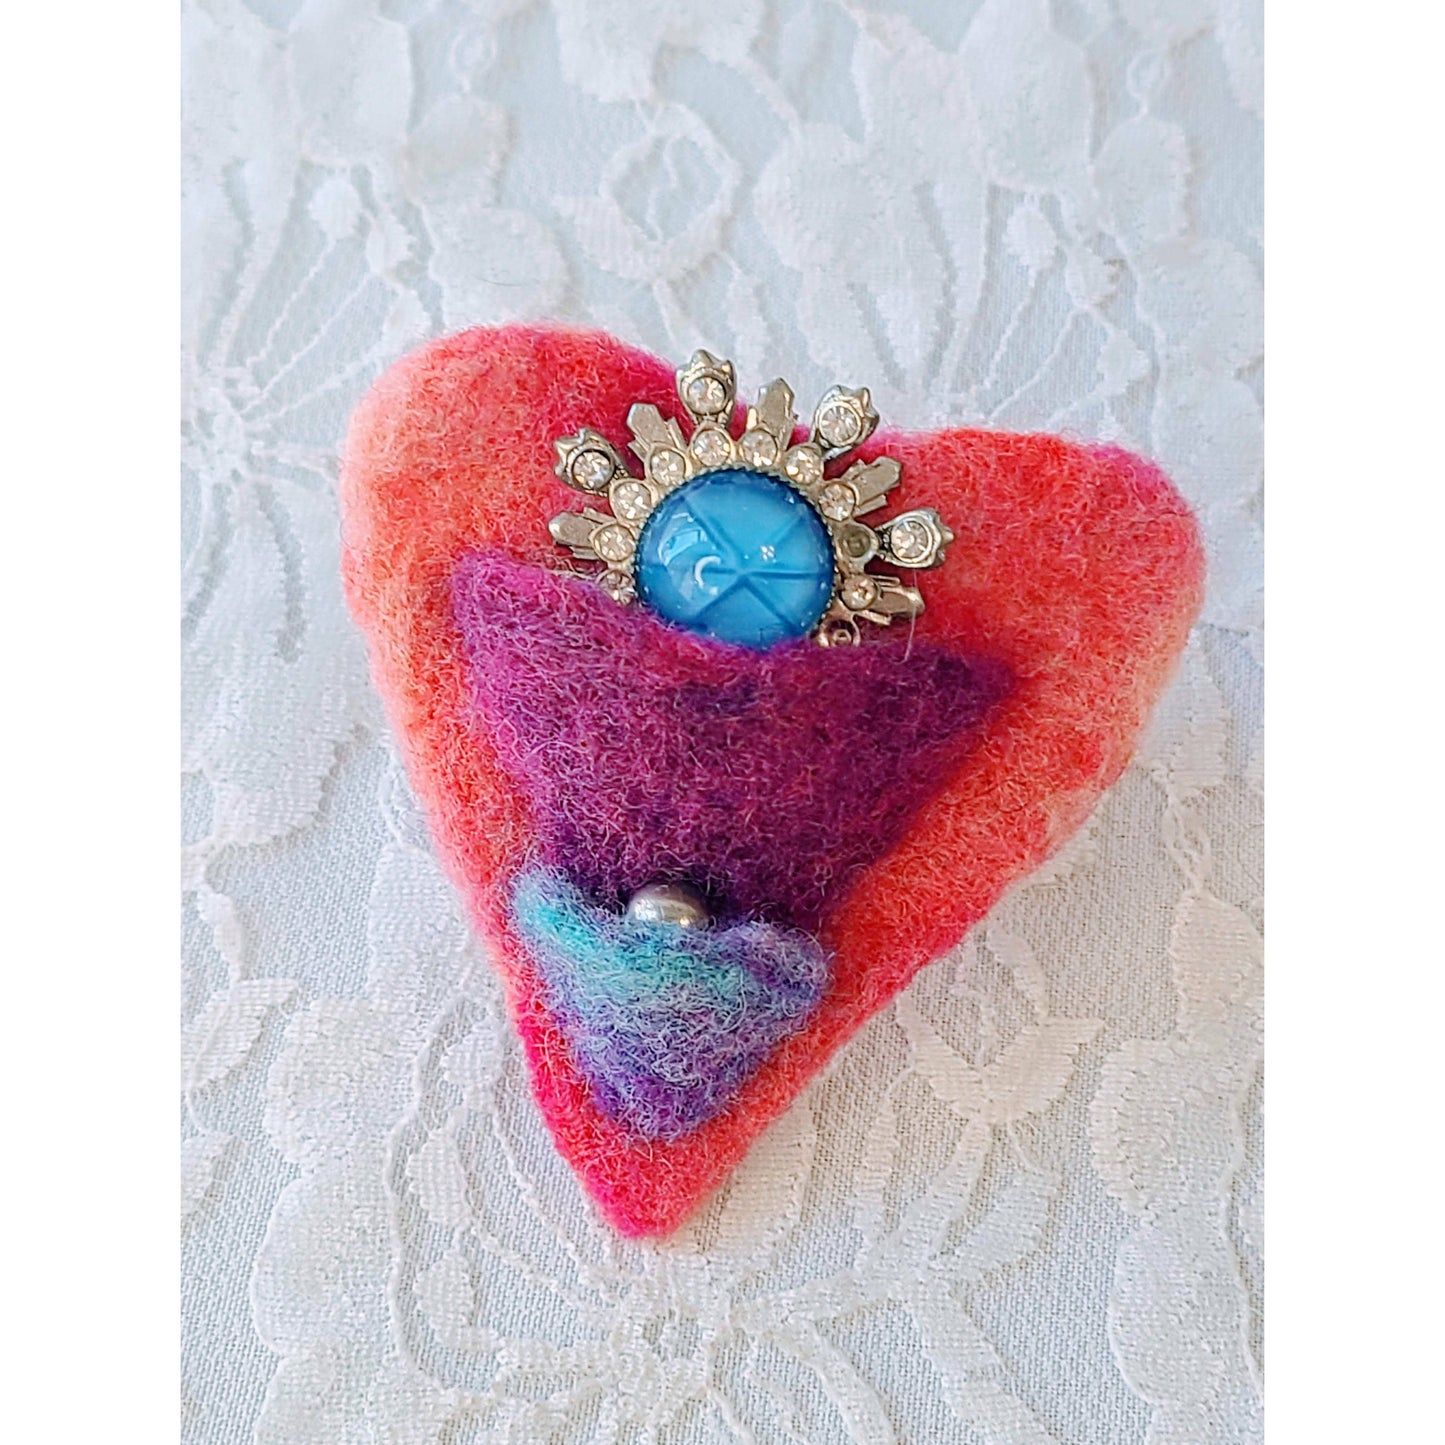 Handmade Set of 3 Felted Brooches Pins ~ Mixed Media Jewelry ~ Unique OOAK Brooch Pin Lapel ~ Christmas Gifts ~ Stocking Stuffers